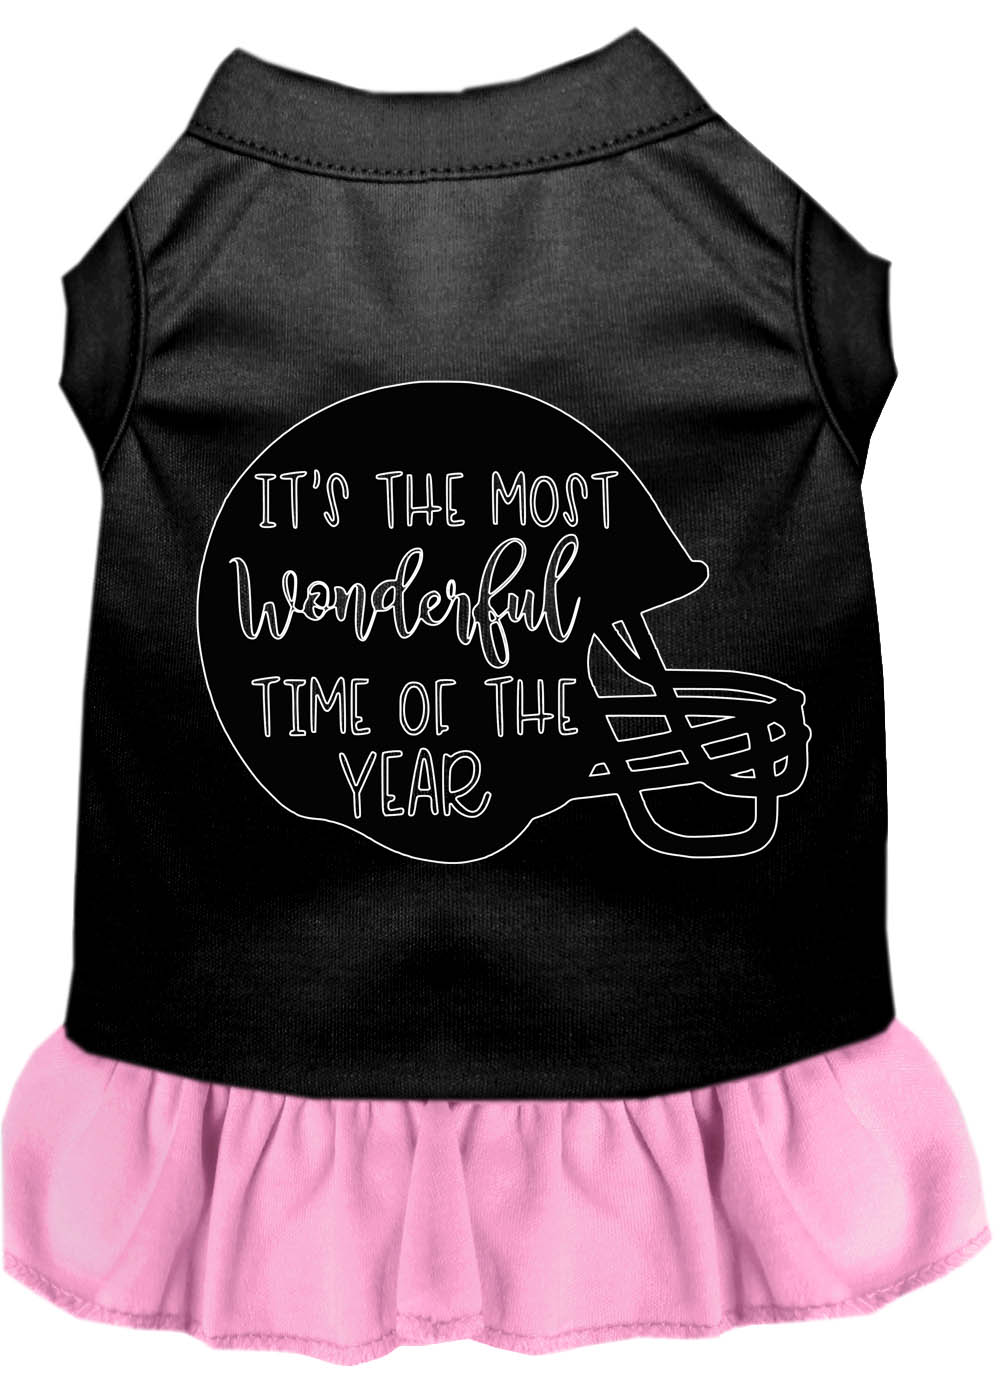 Most Wonderful Time of the Year (Football) Screen Print Dog Dress Black with Light Pink Med